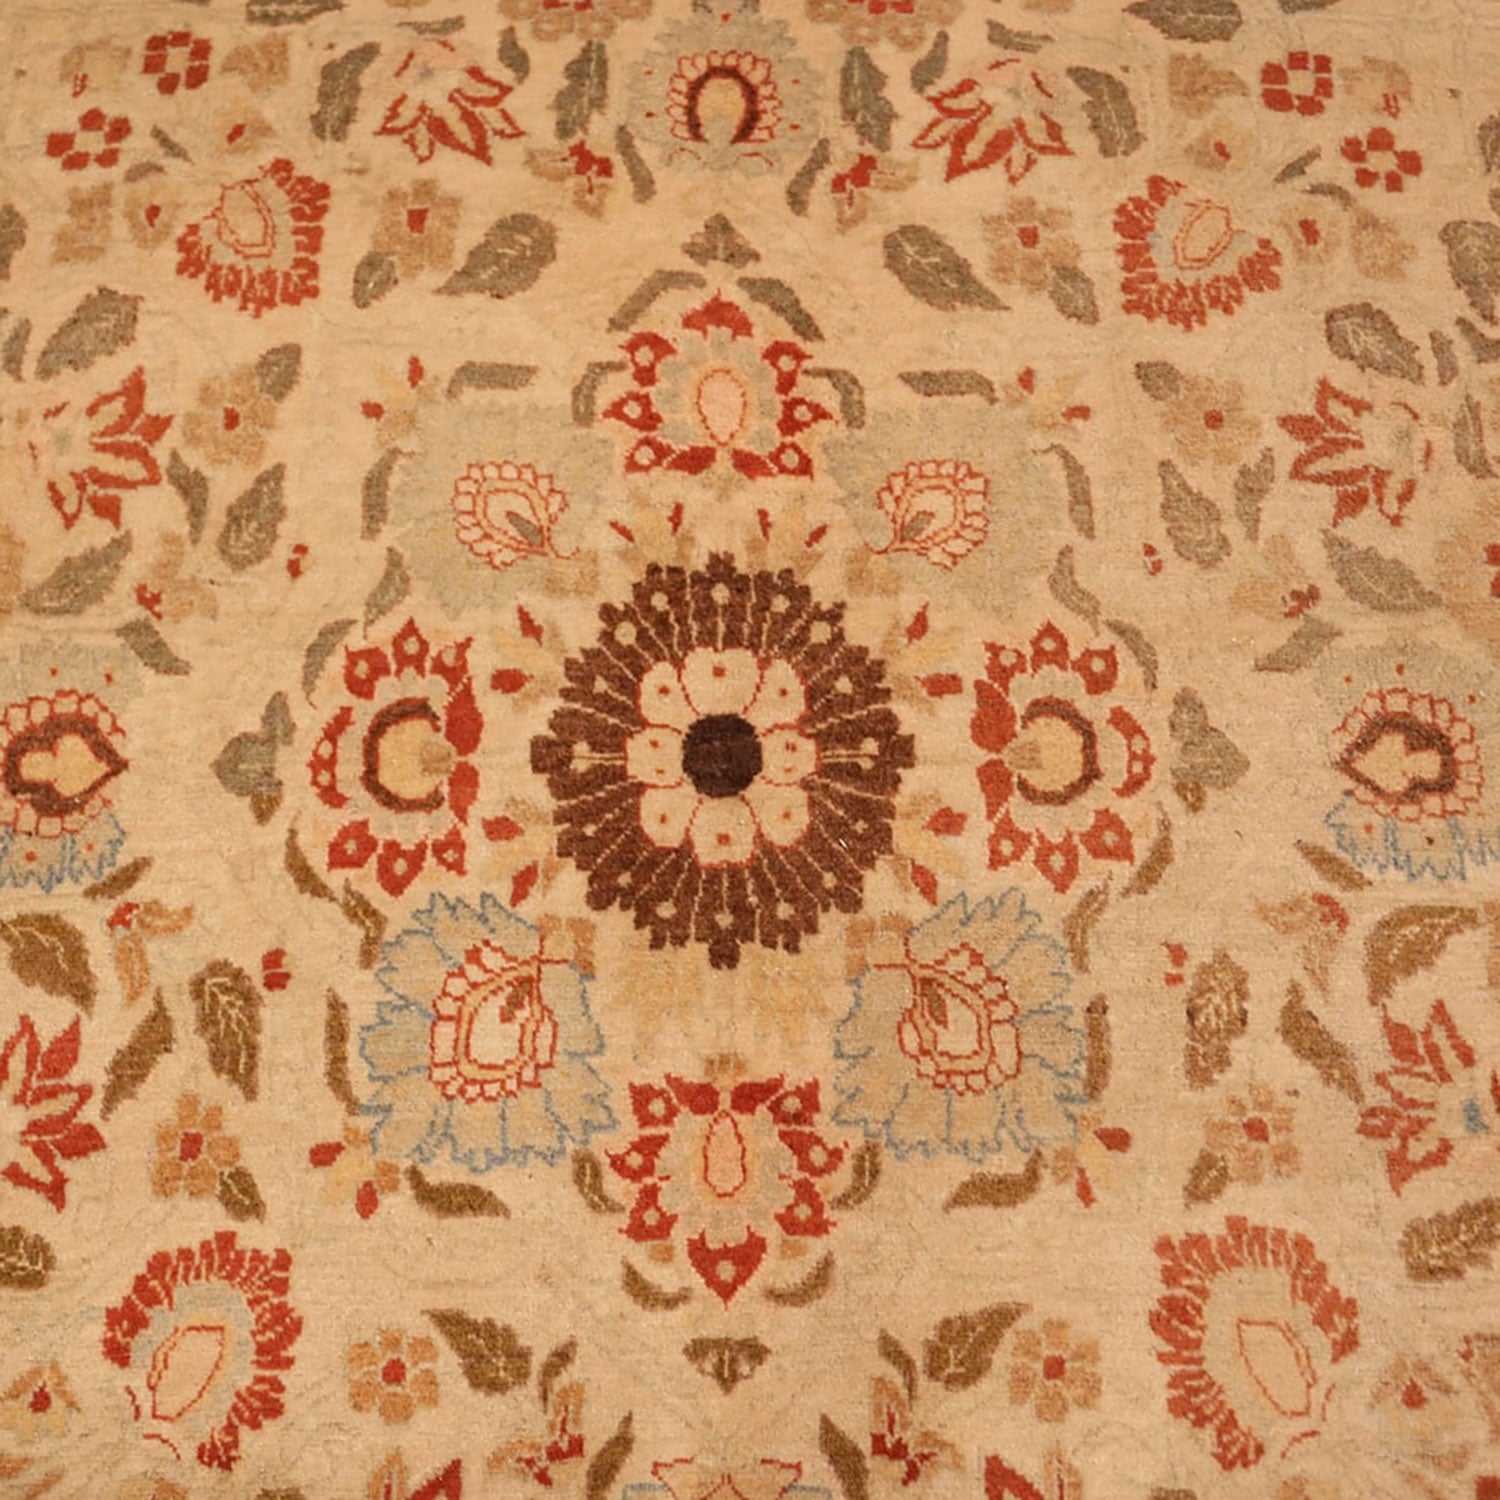 Exquisite traditional carpet with intricate floral designs in warm tones.